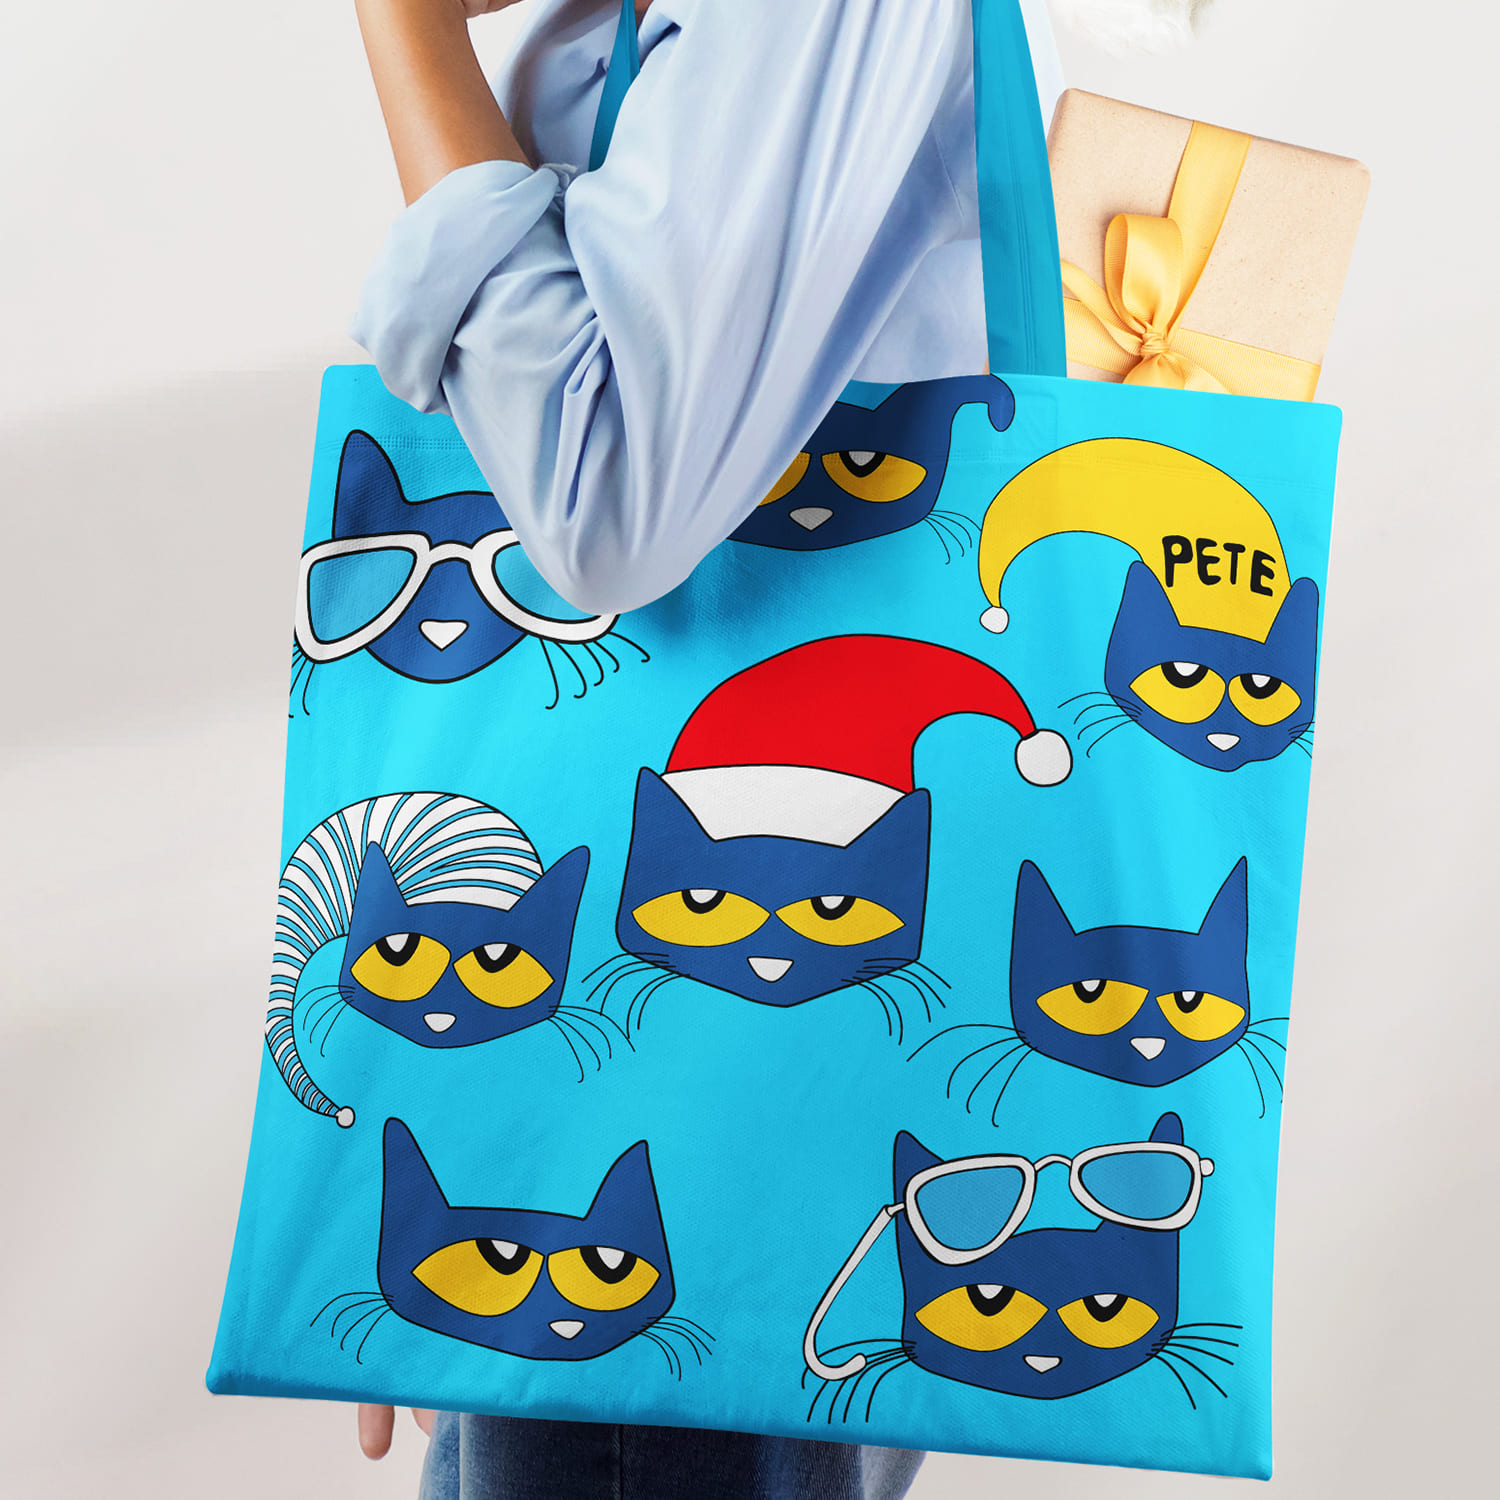 Woman holding a blue bag with cats on it.